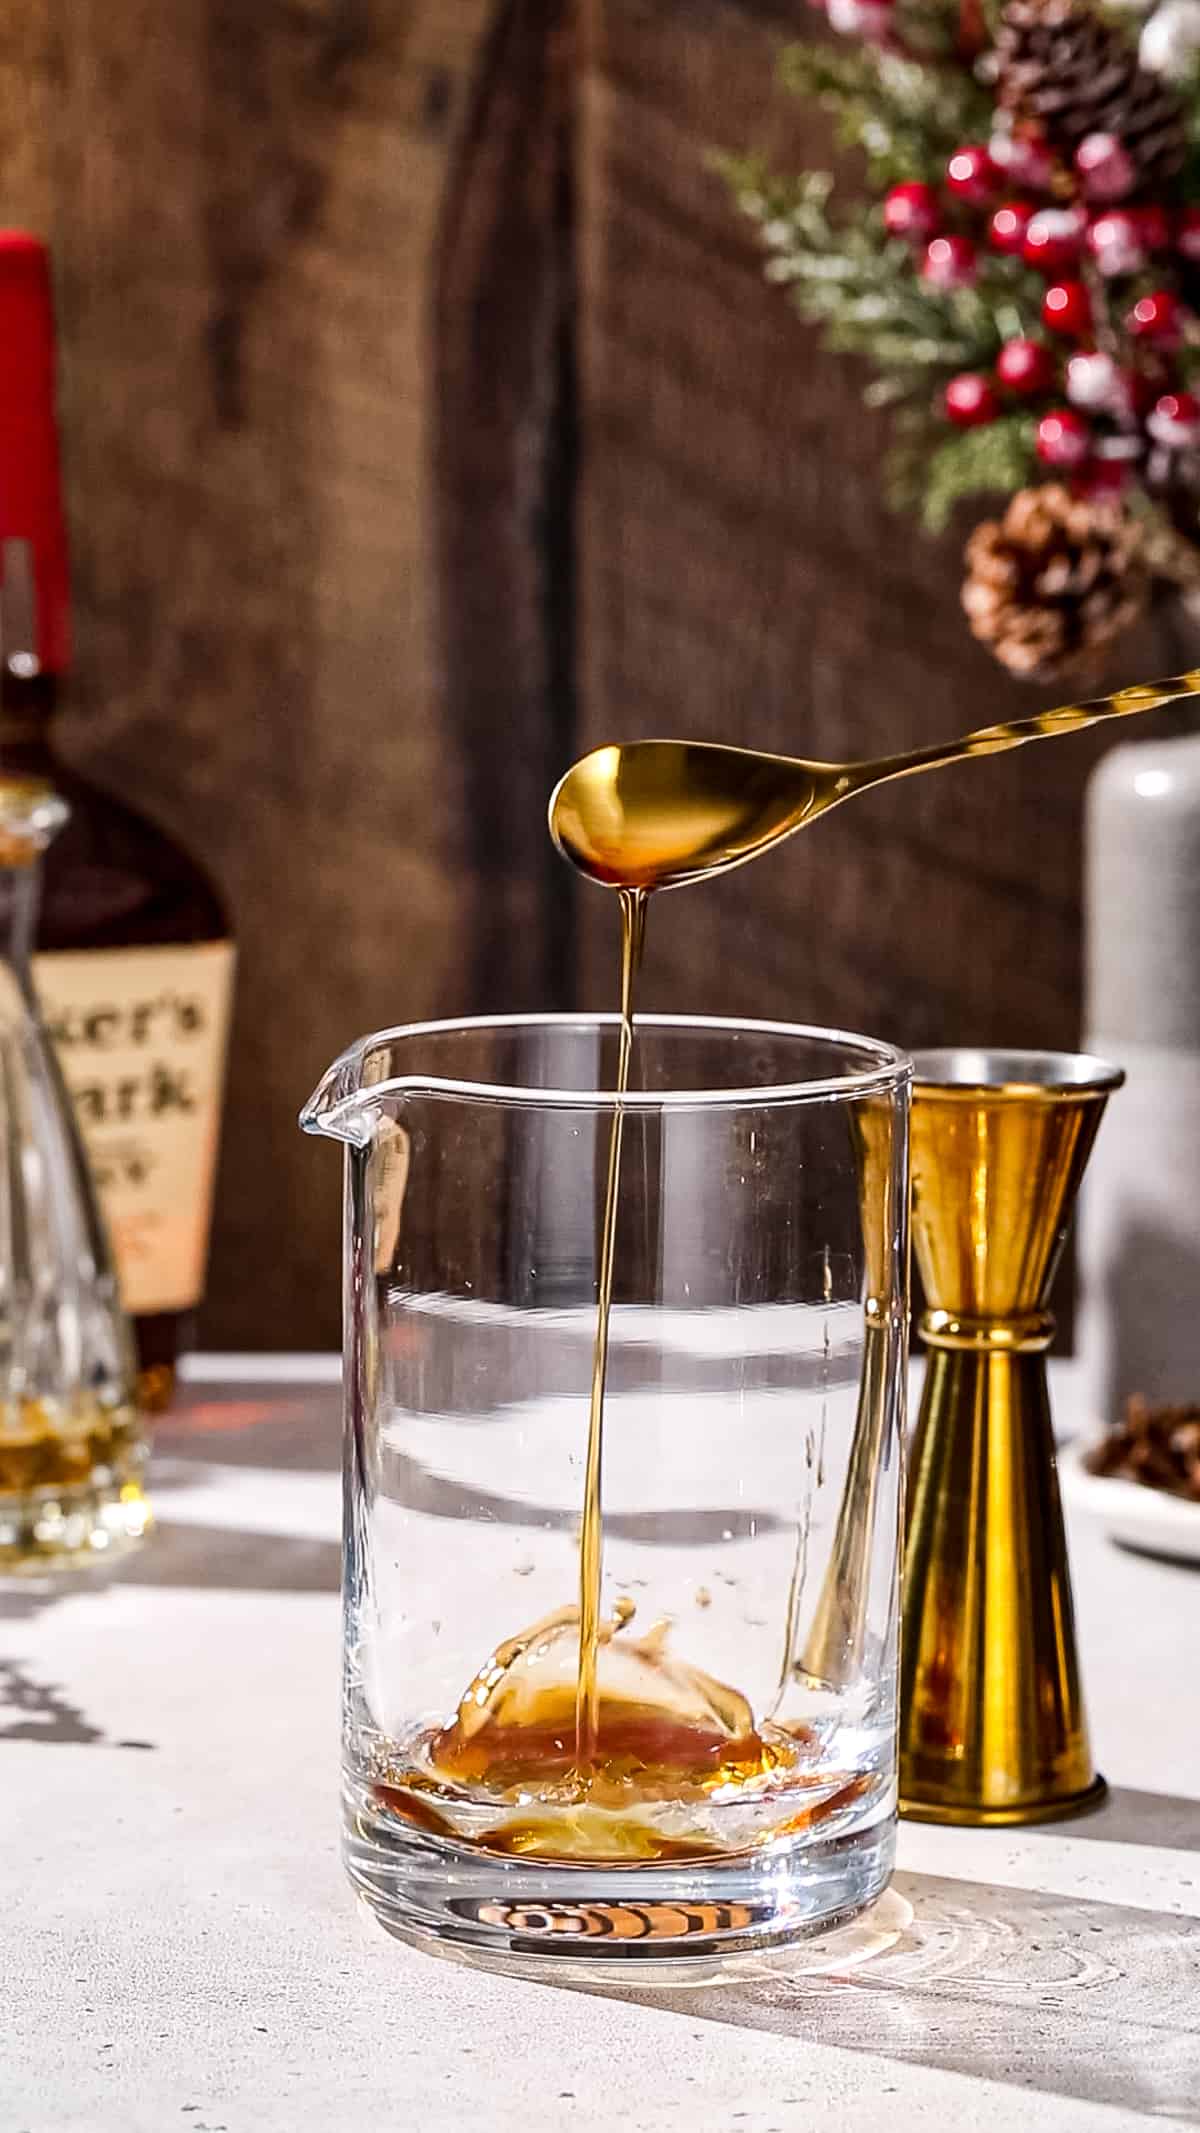 Cinnamon syrup being added to a cocktail mixing glass using a gold bar spoon.